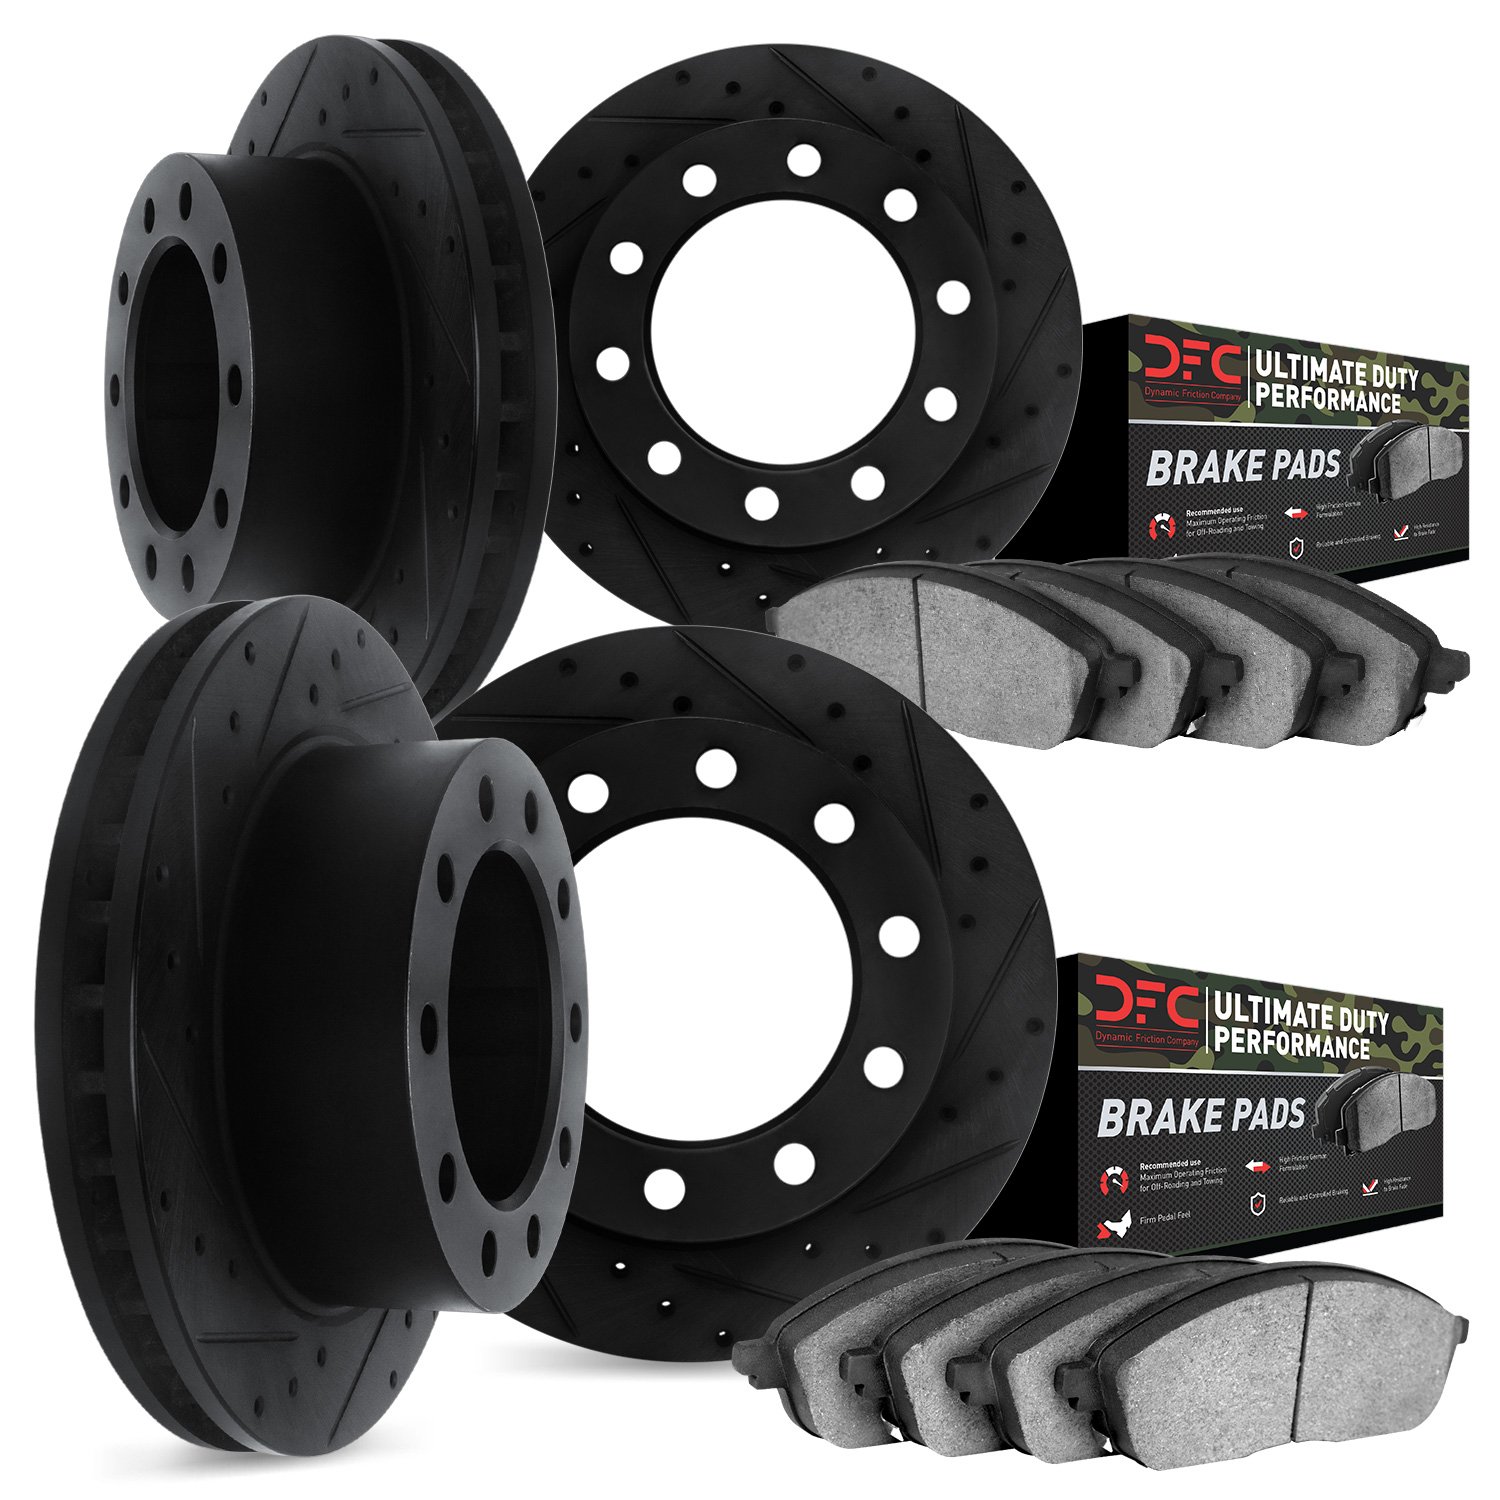 8404-54012 Drilled/Slotted Brake Rotors with Ultimate-Duty Brake Pads Kit [Black], 1999-2001 Ford/Lincoln/Mercury/Mazda, Positio